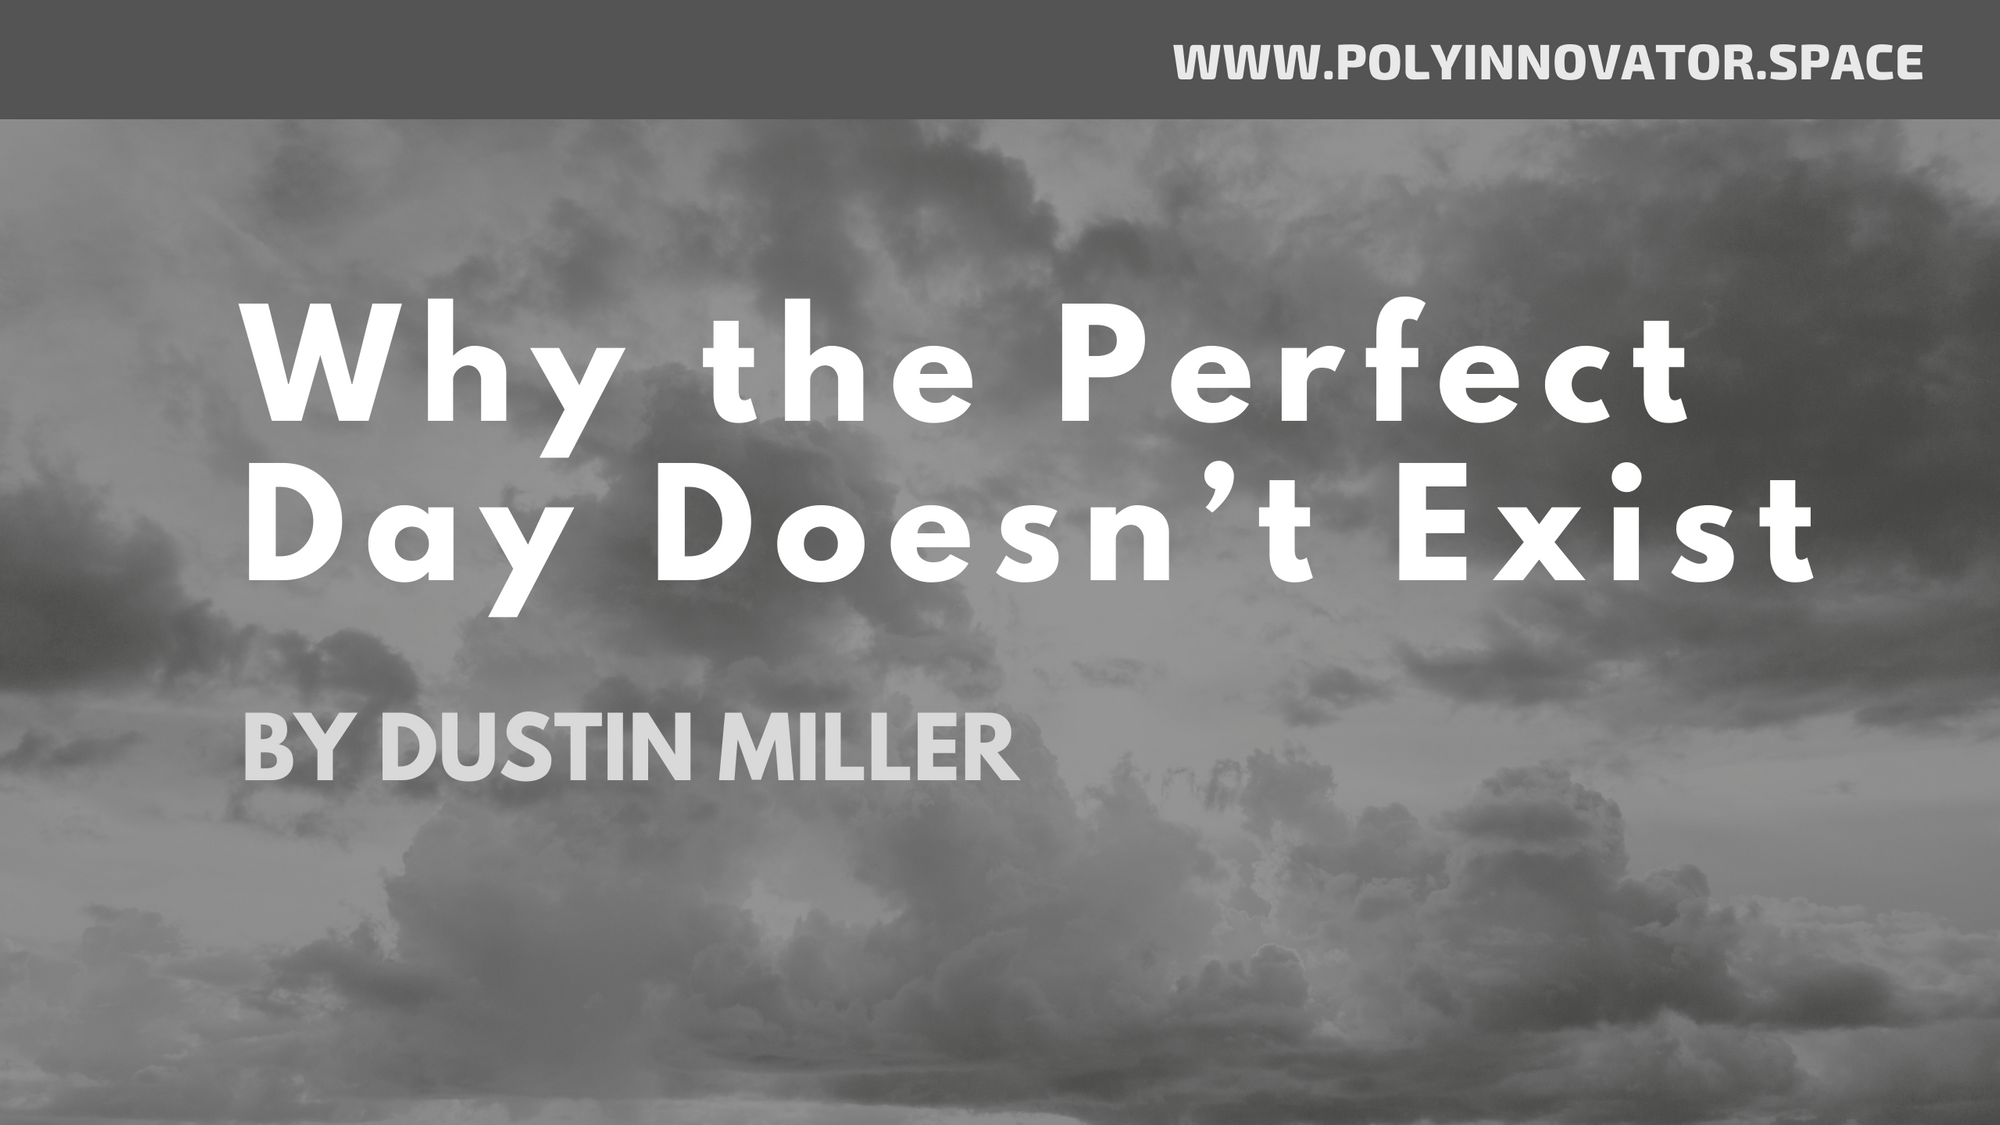 Why the Perfect Day Doesn’t Exist